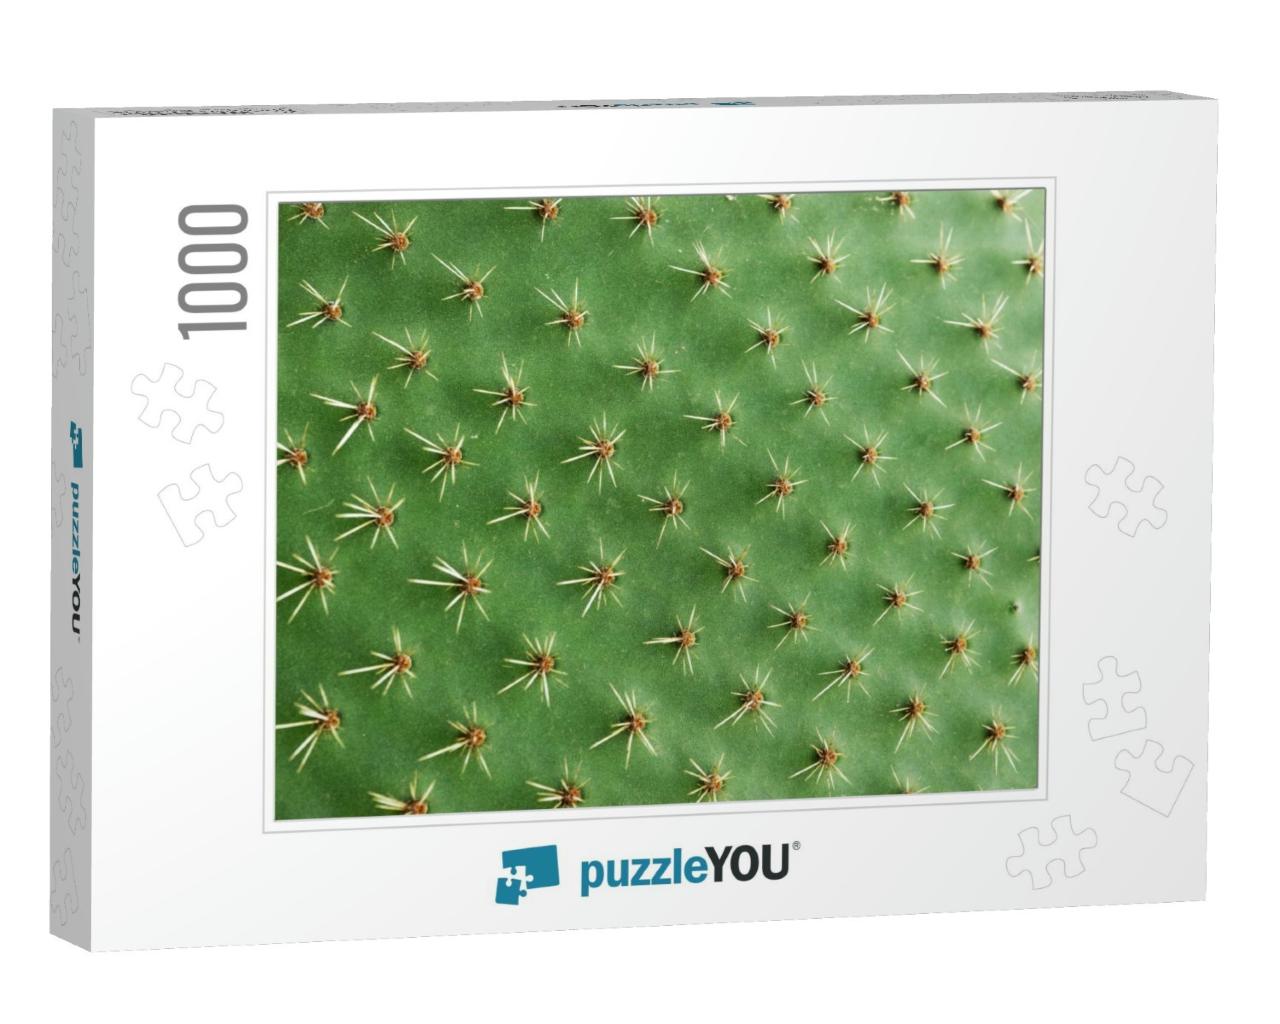 Closeup of Spines on Cactus, Background Cactus with Spine... Jigsaw Puzzle with 1000 pieces